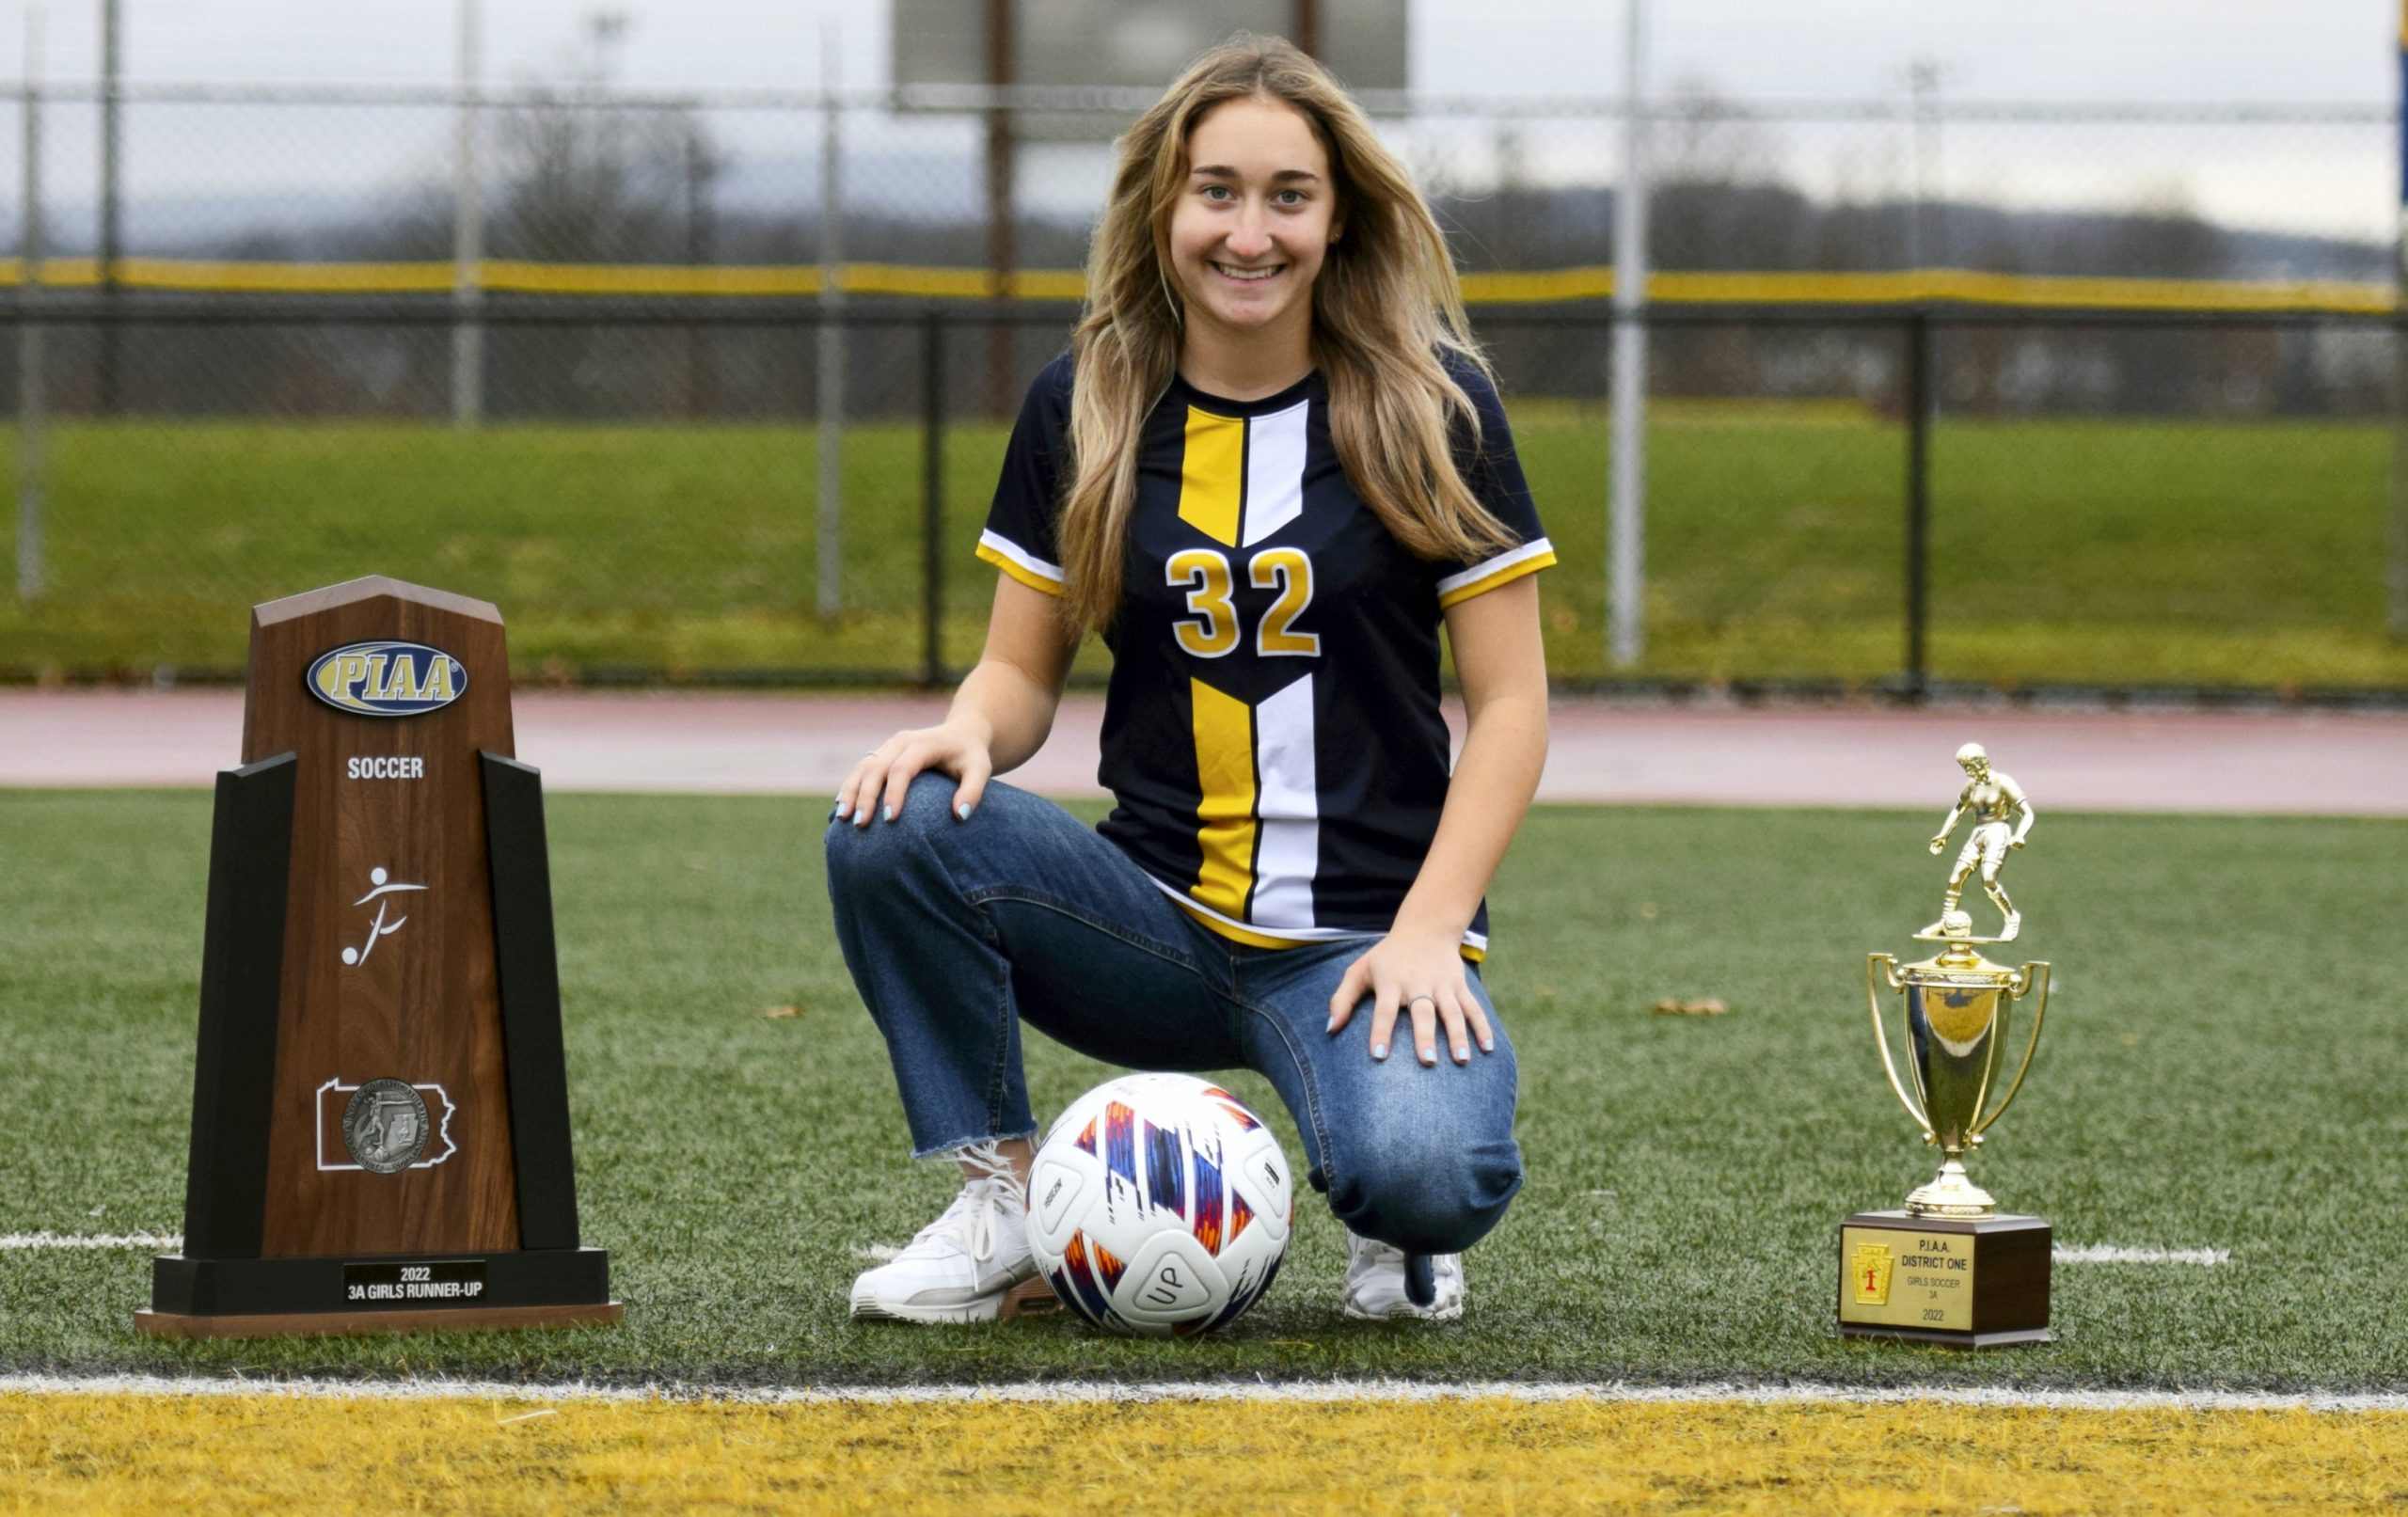 Mercury All-Area Kyra Lesko comes back from ACL injury, moves back and unlocks Upper Perkiomens potential in magical season